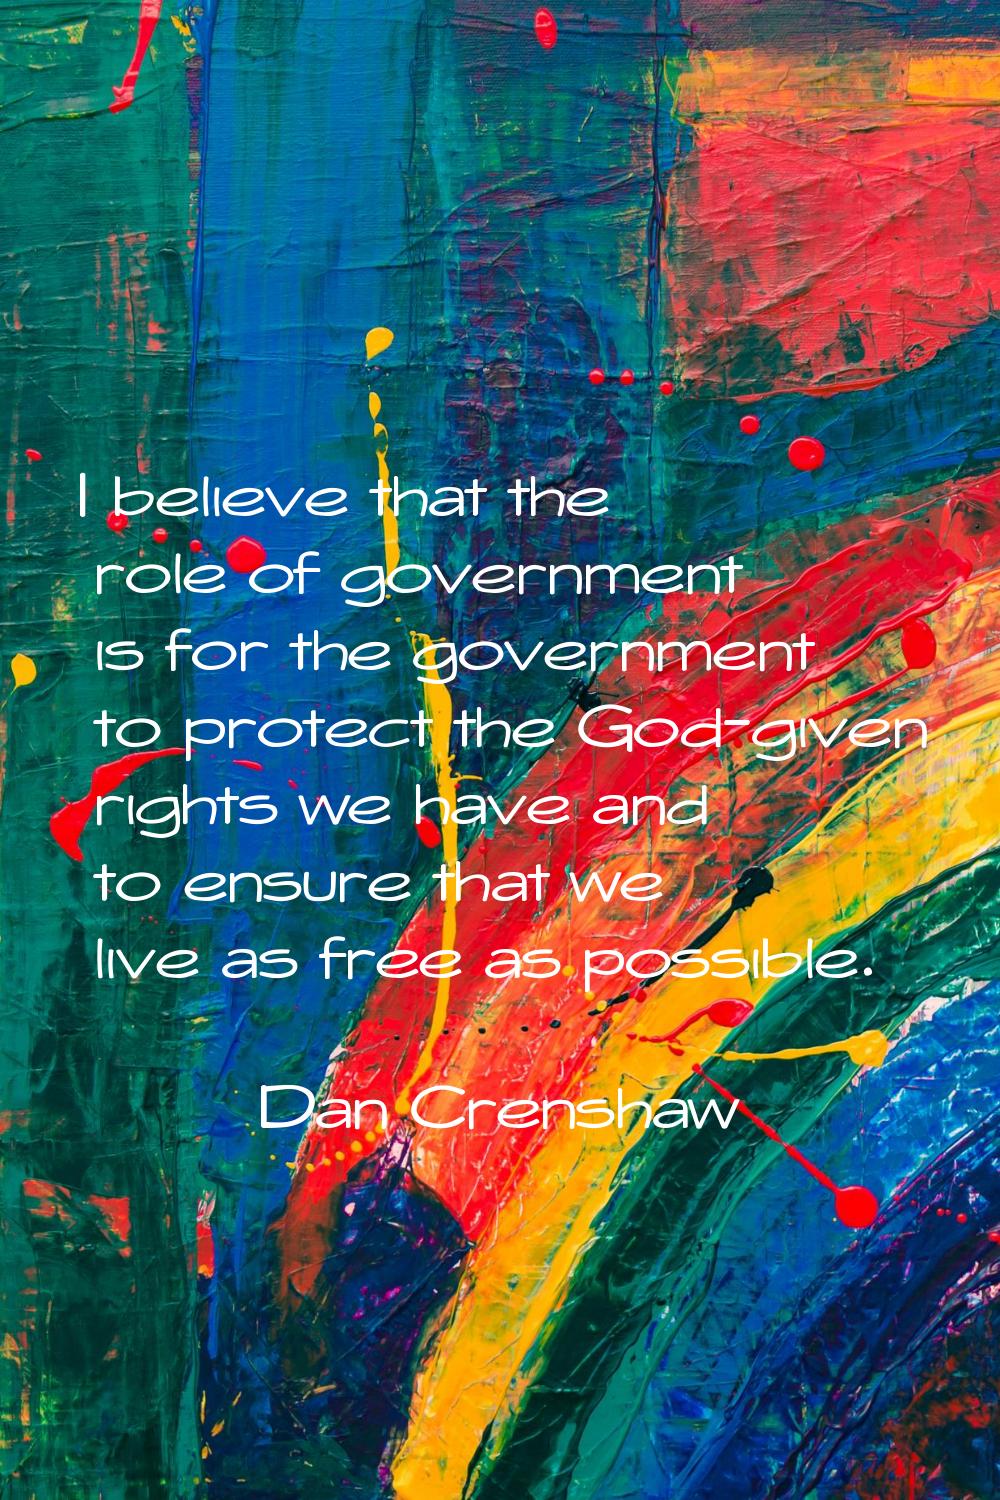 I believe that the role of government is for the government to protect the God-given rights we have